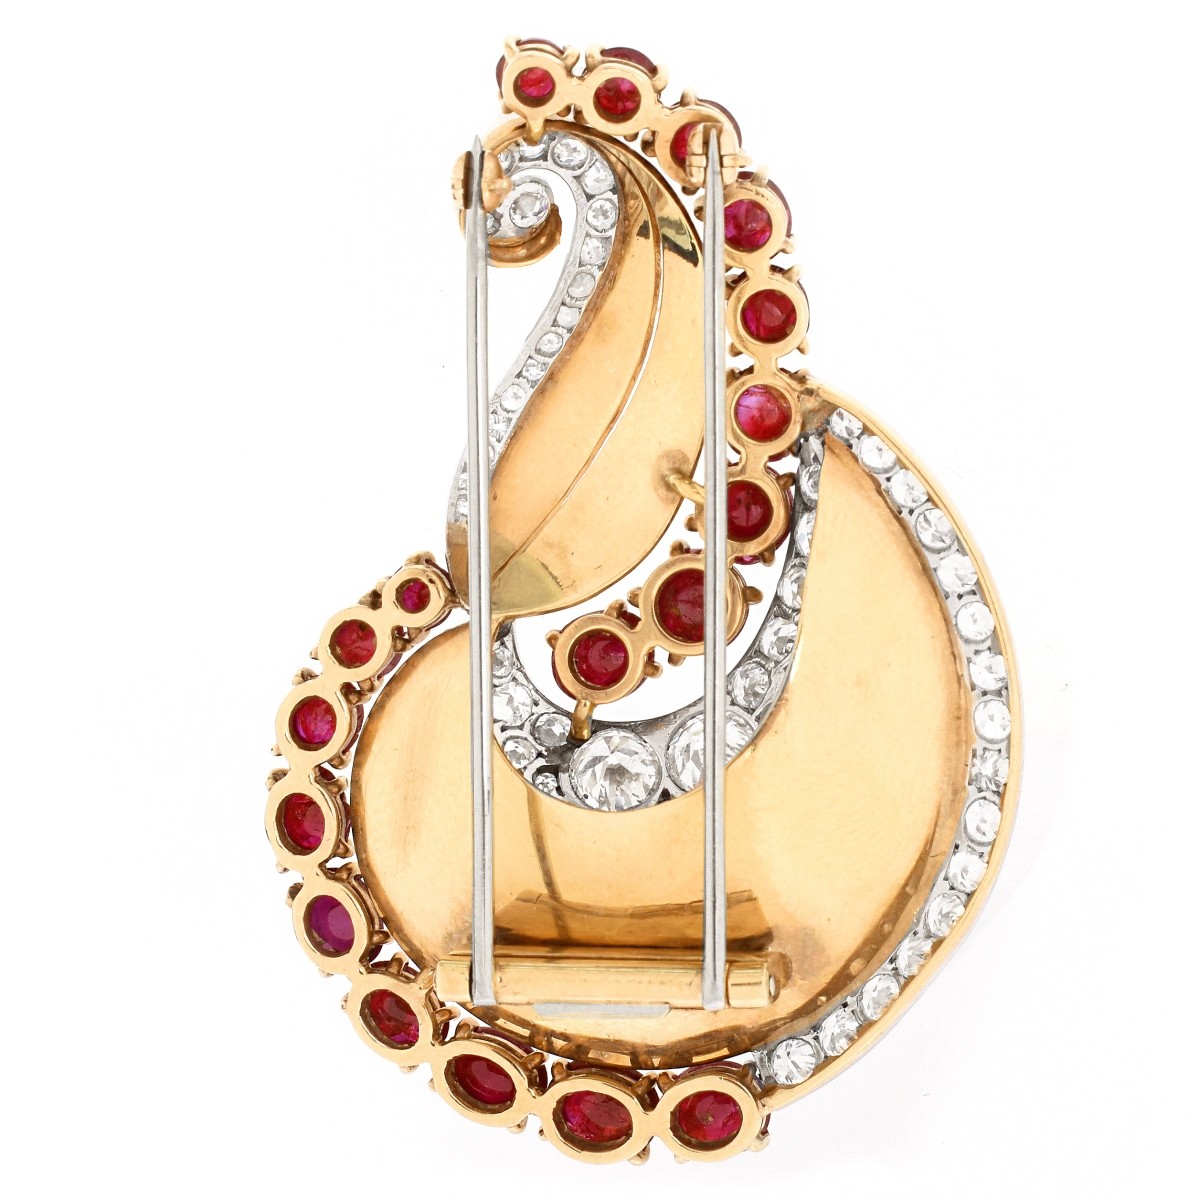 Vintage Mauboussin Diamond and Ruby Brooch - Image 3 of 3